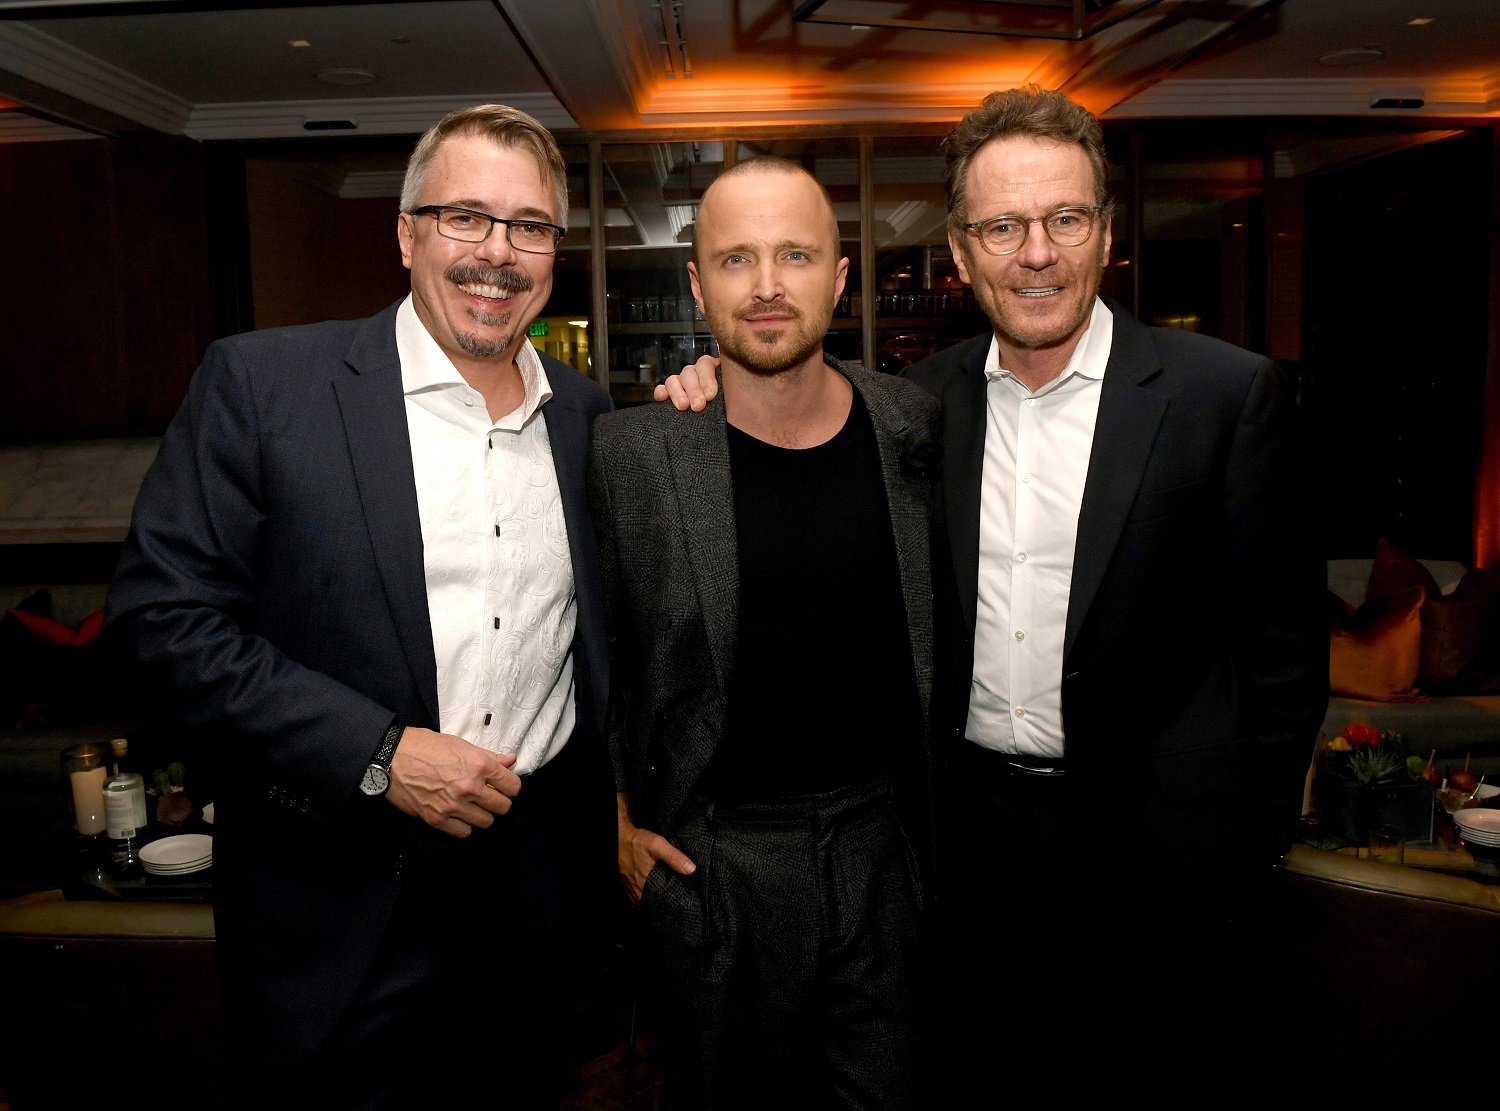 Vince Gilligan, Aaron Paul, and Bryan Cranston pose at the after party for the premiere of El Camino: A Breaking Bad Movie